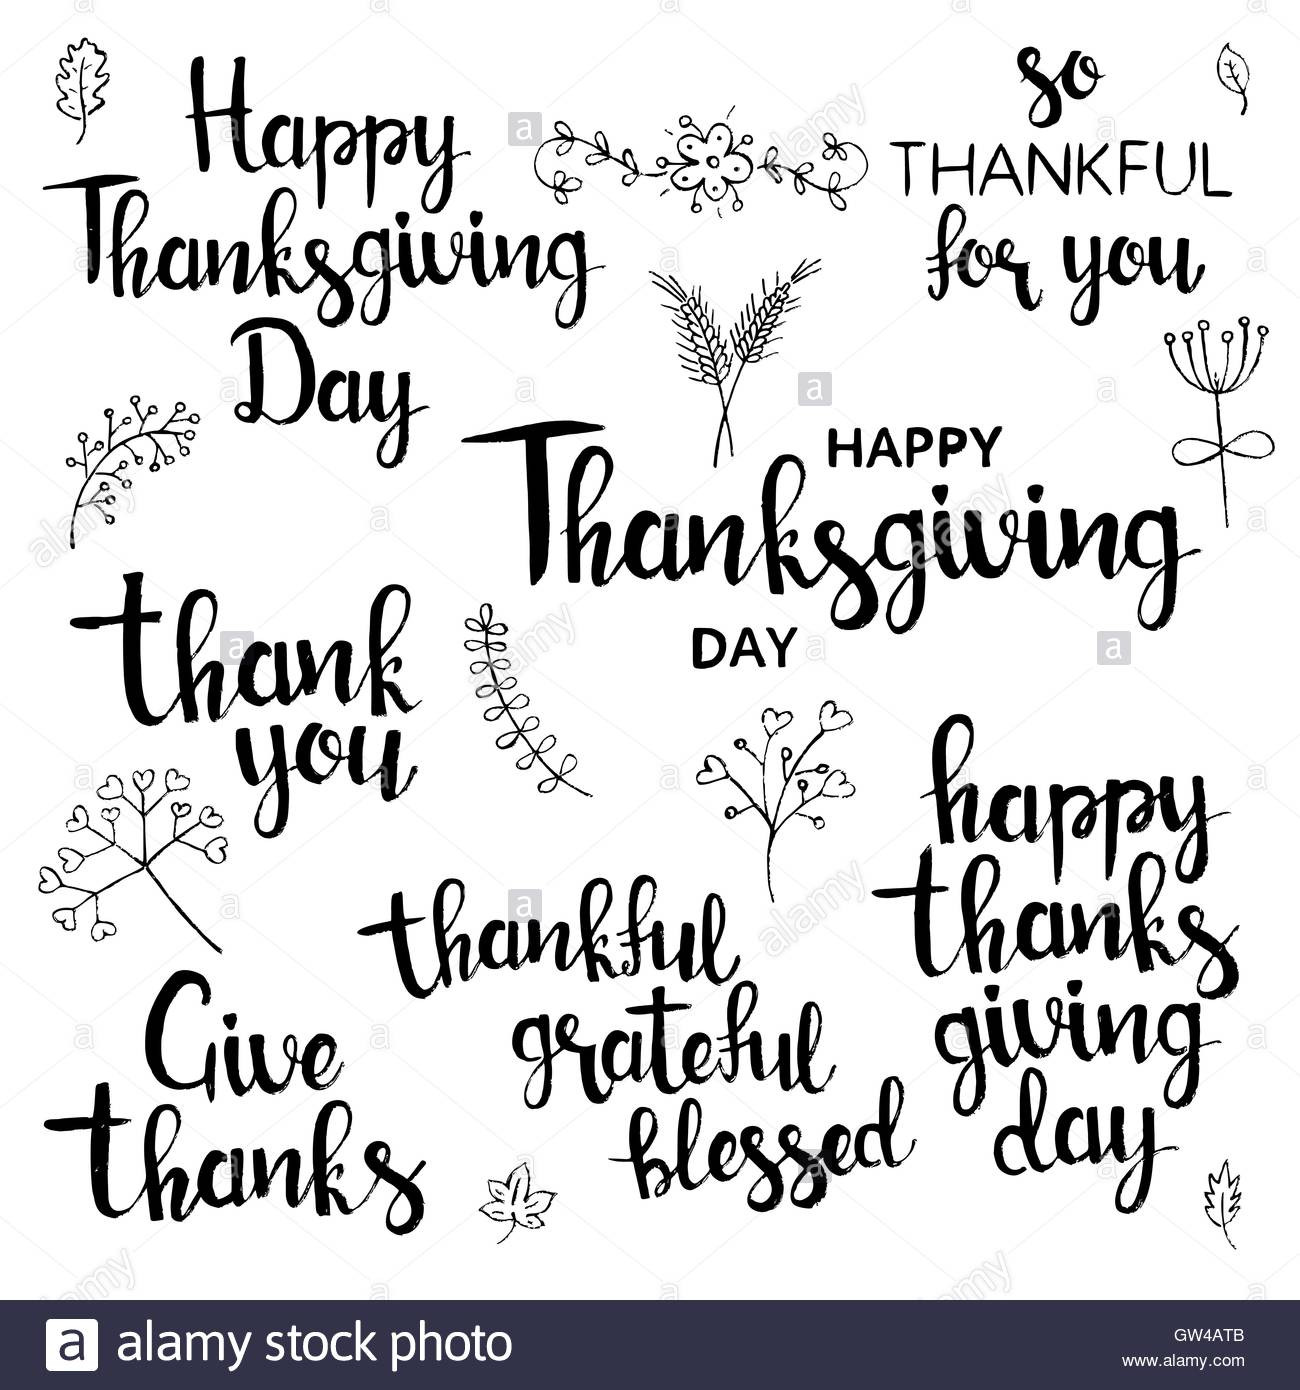 Thanksgiving Quotes Calligraphy
 Happy Thanksgiving Day lettering set Modern vector hand